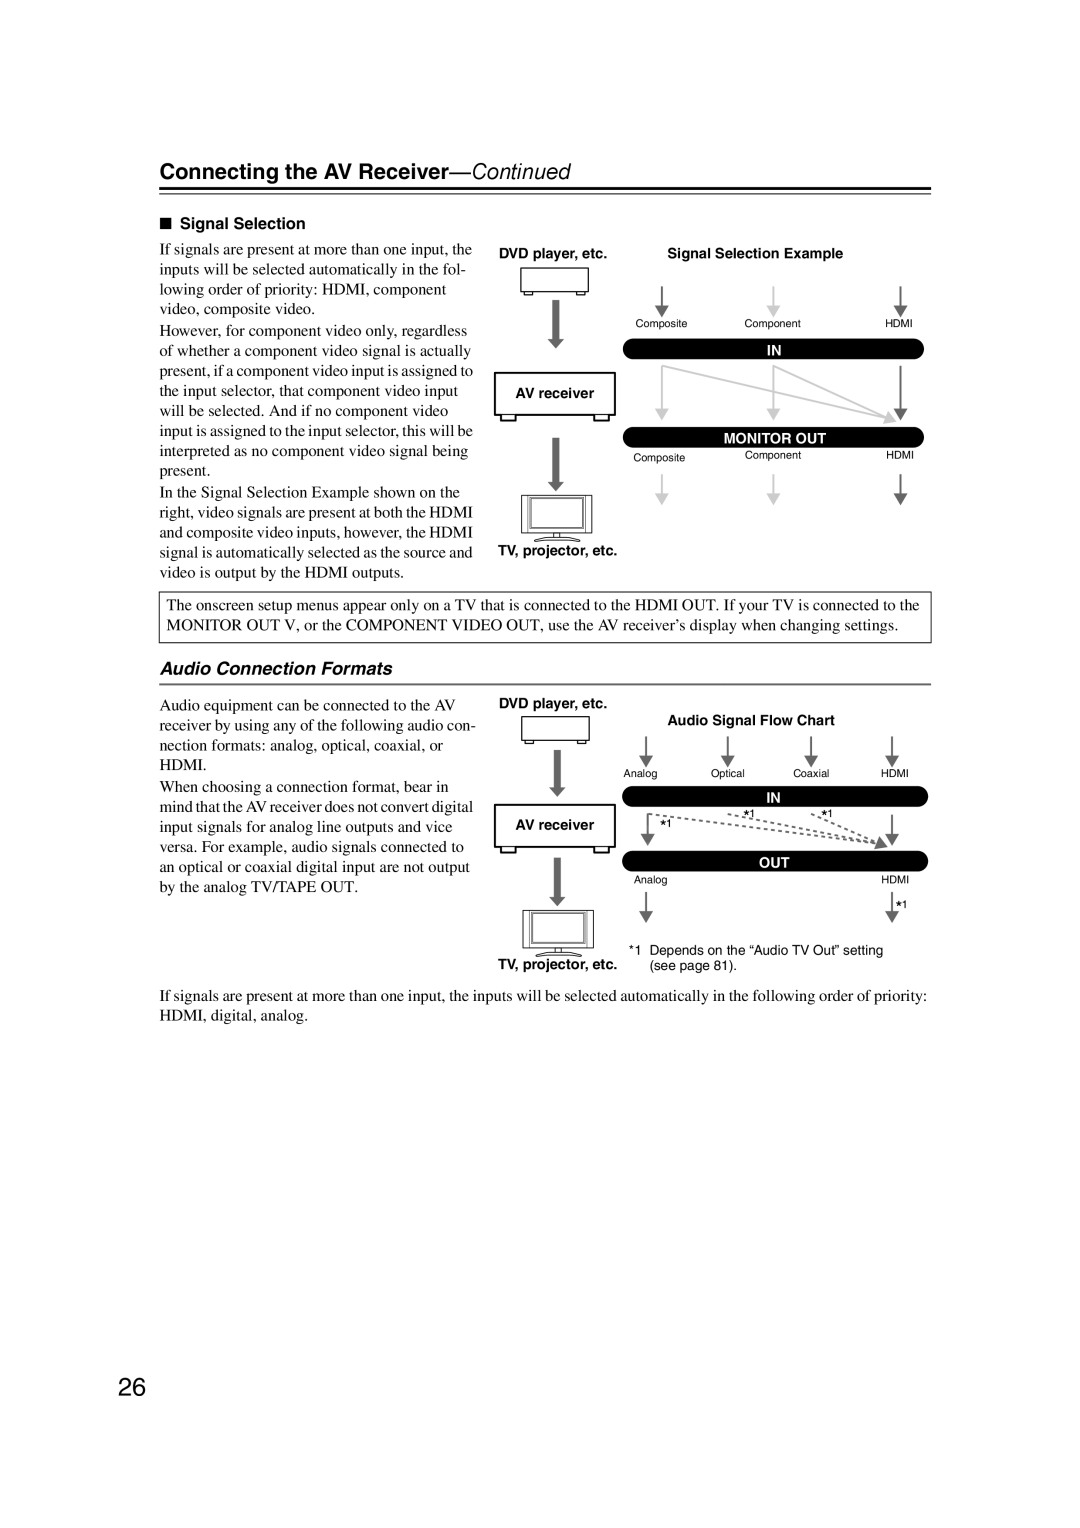 Onkyo SR607 instruction manual Audio Connection Formats, Connecting the AV Receiver—Continued, Signal Selection 